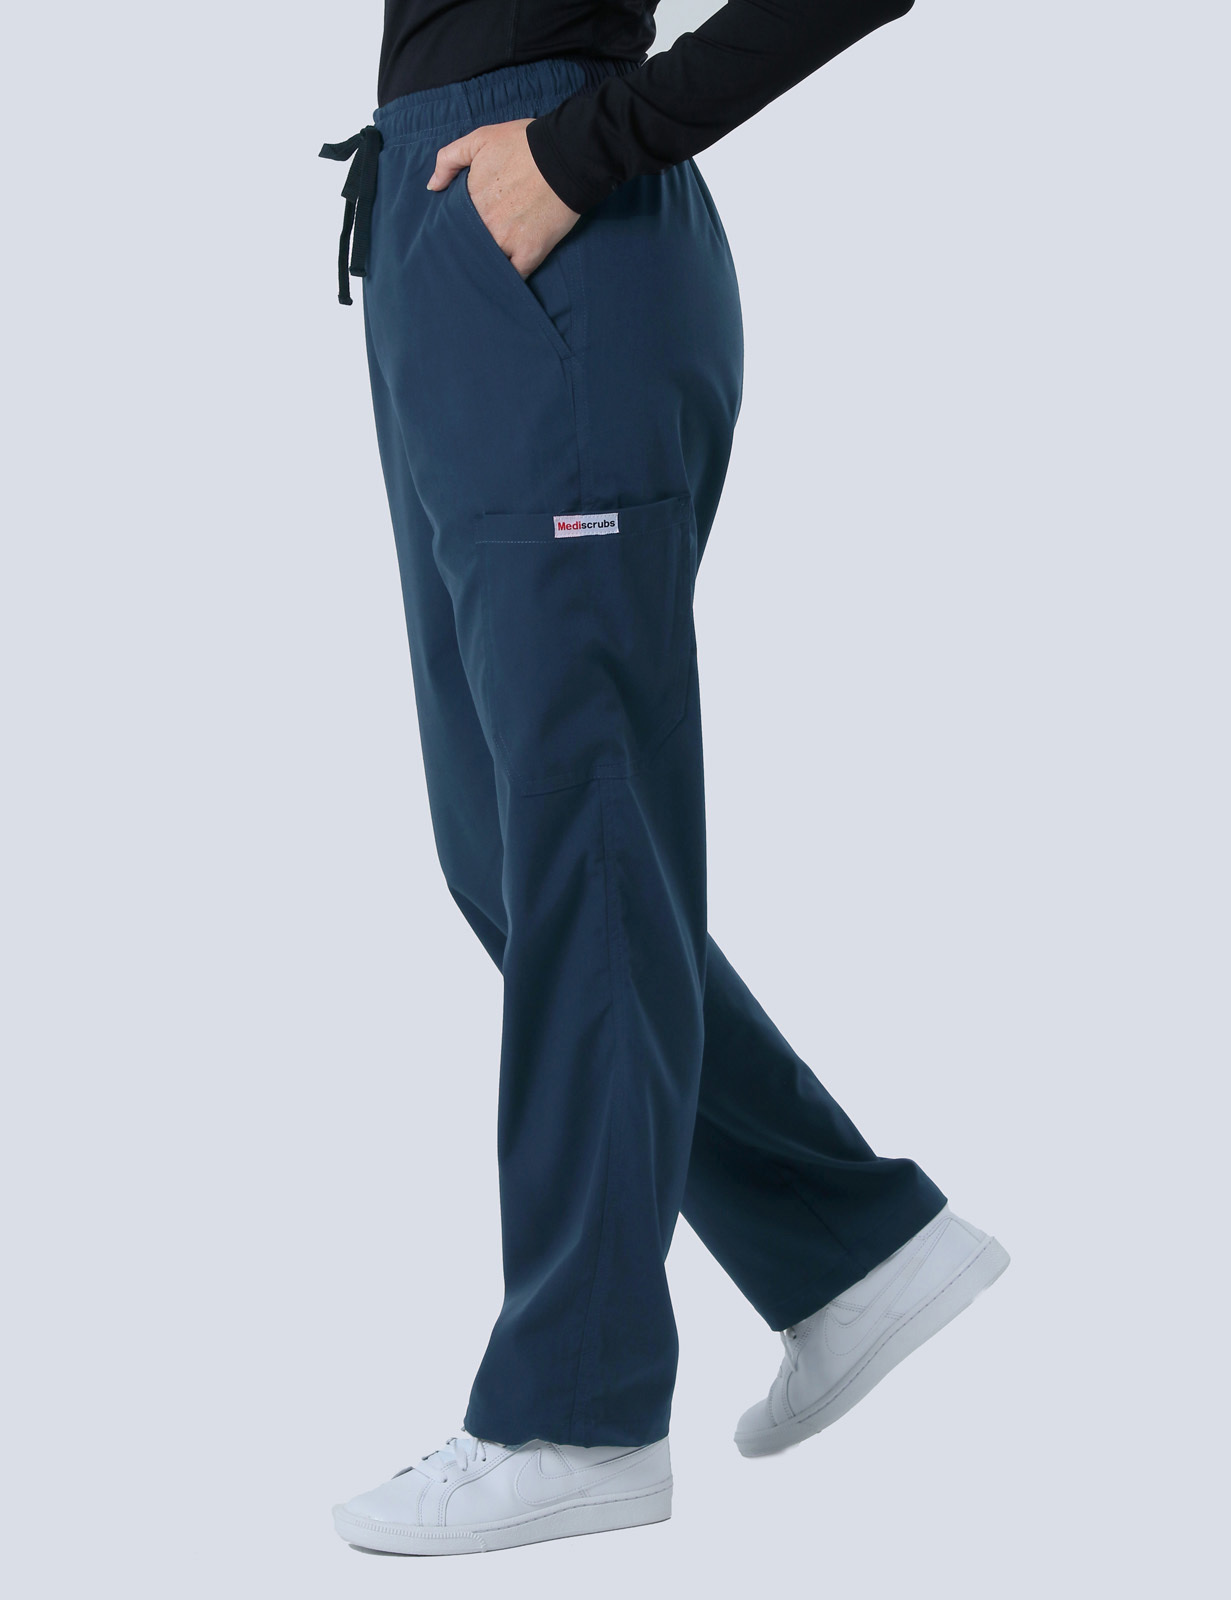 Royal Hobart Hospital Emergency Department Specialist Uniform Set Bundle (Women's Fit Top and Cargo Pants in Navy  incl Logo)